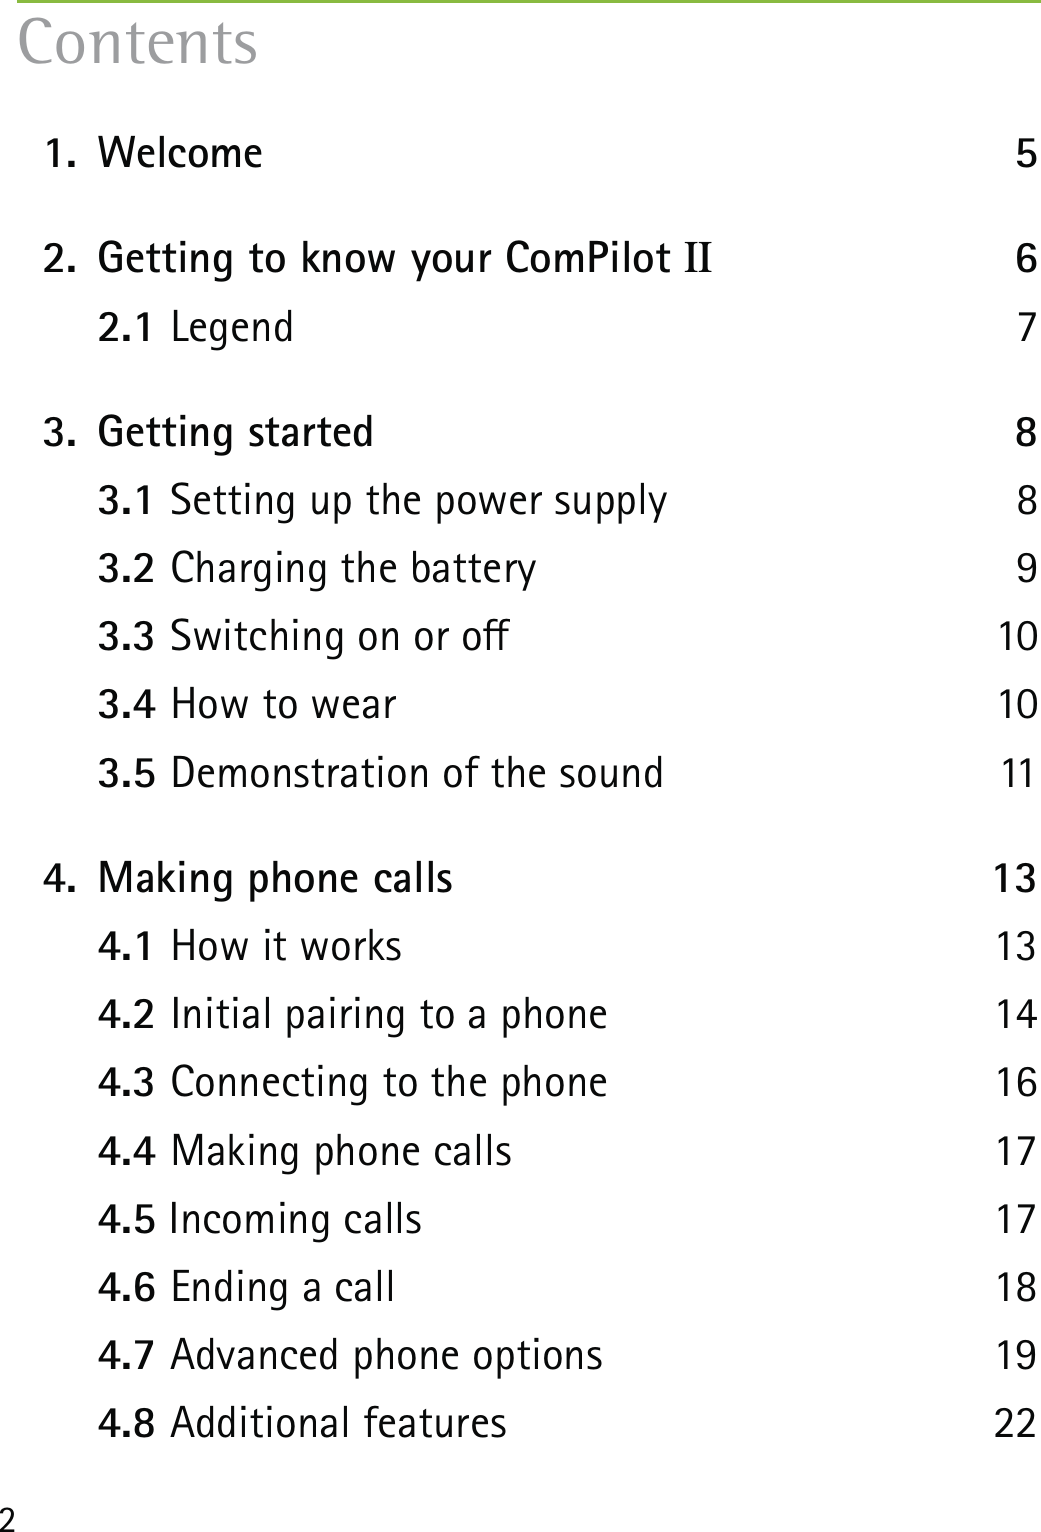 2 1.  Welcome  5  2.  Getting to know your ComPilot II 6  2.1 Legend 7  3.  Getting started  8  3.1 Setting up the power supply  8  3.2 Charging the battery  9  3.3 Switching on or o  10  3.4 How to wear  10  3.5 Demonstration of the sound  11  4.  Making phone calls  13  4.1 How it works   13  4.2 Initial pairing to a phone  14  4.3 Connecting to the phone  16  4.4 Making phone calls  17  4.5 Incoming calls  17  4.6 Ending a call  18  4.7 Advanced phone options  19  4.8 Additional features  22Contents